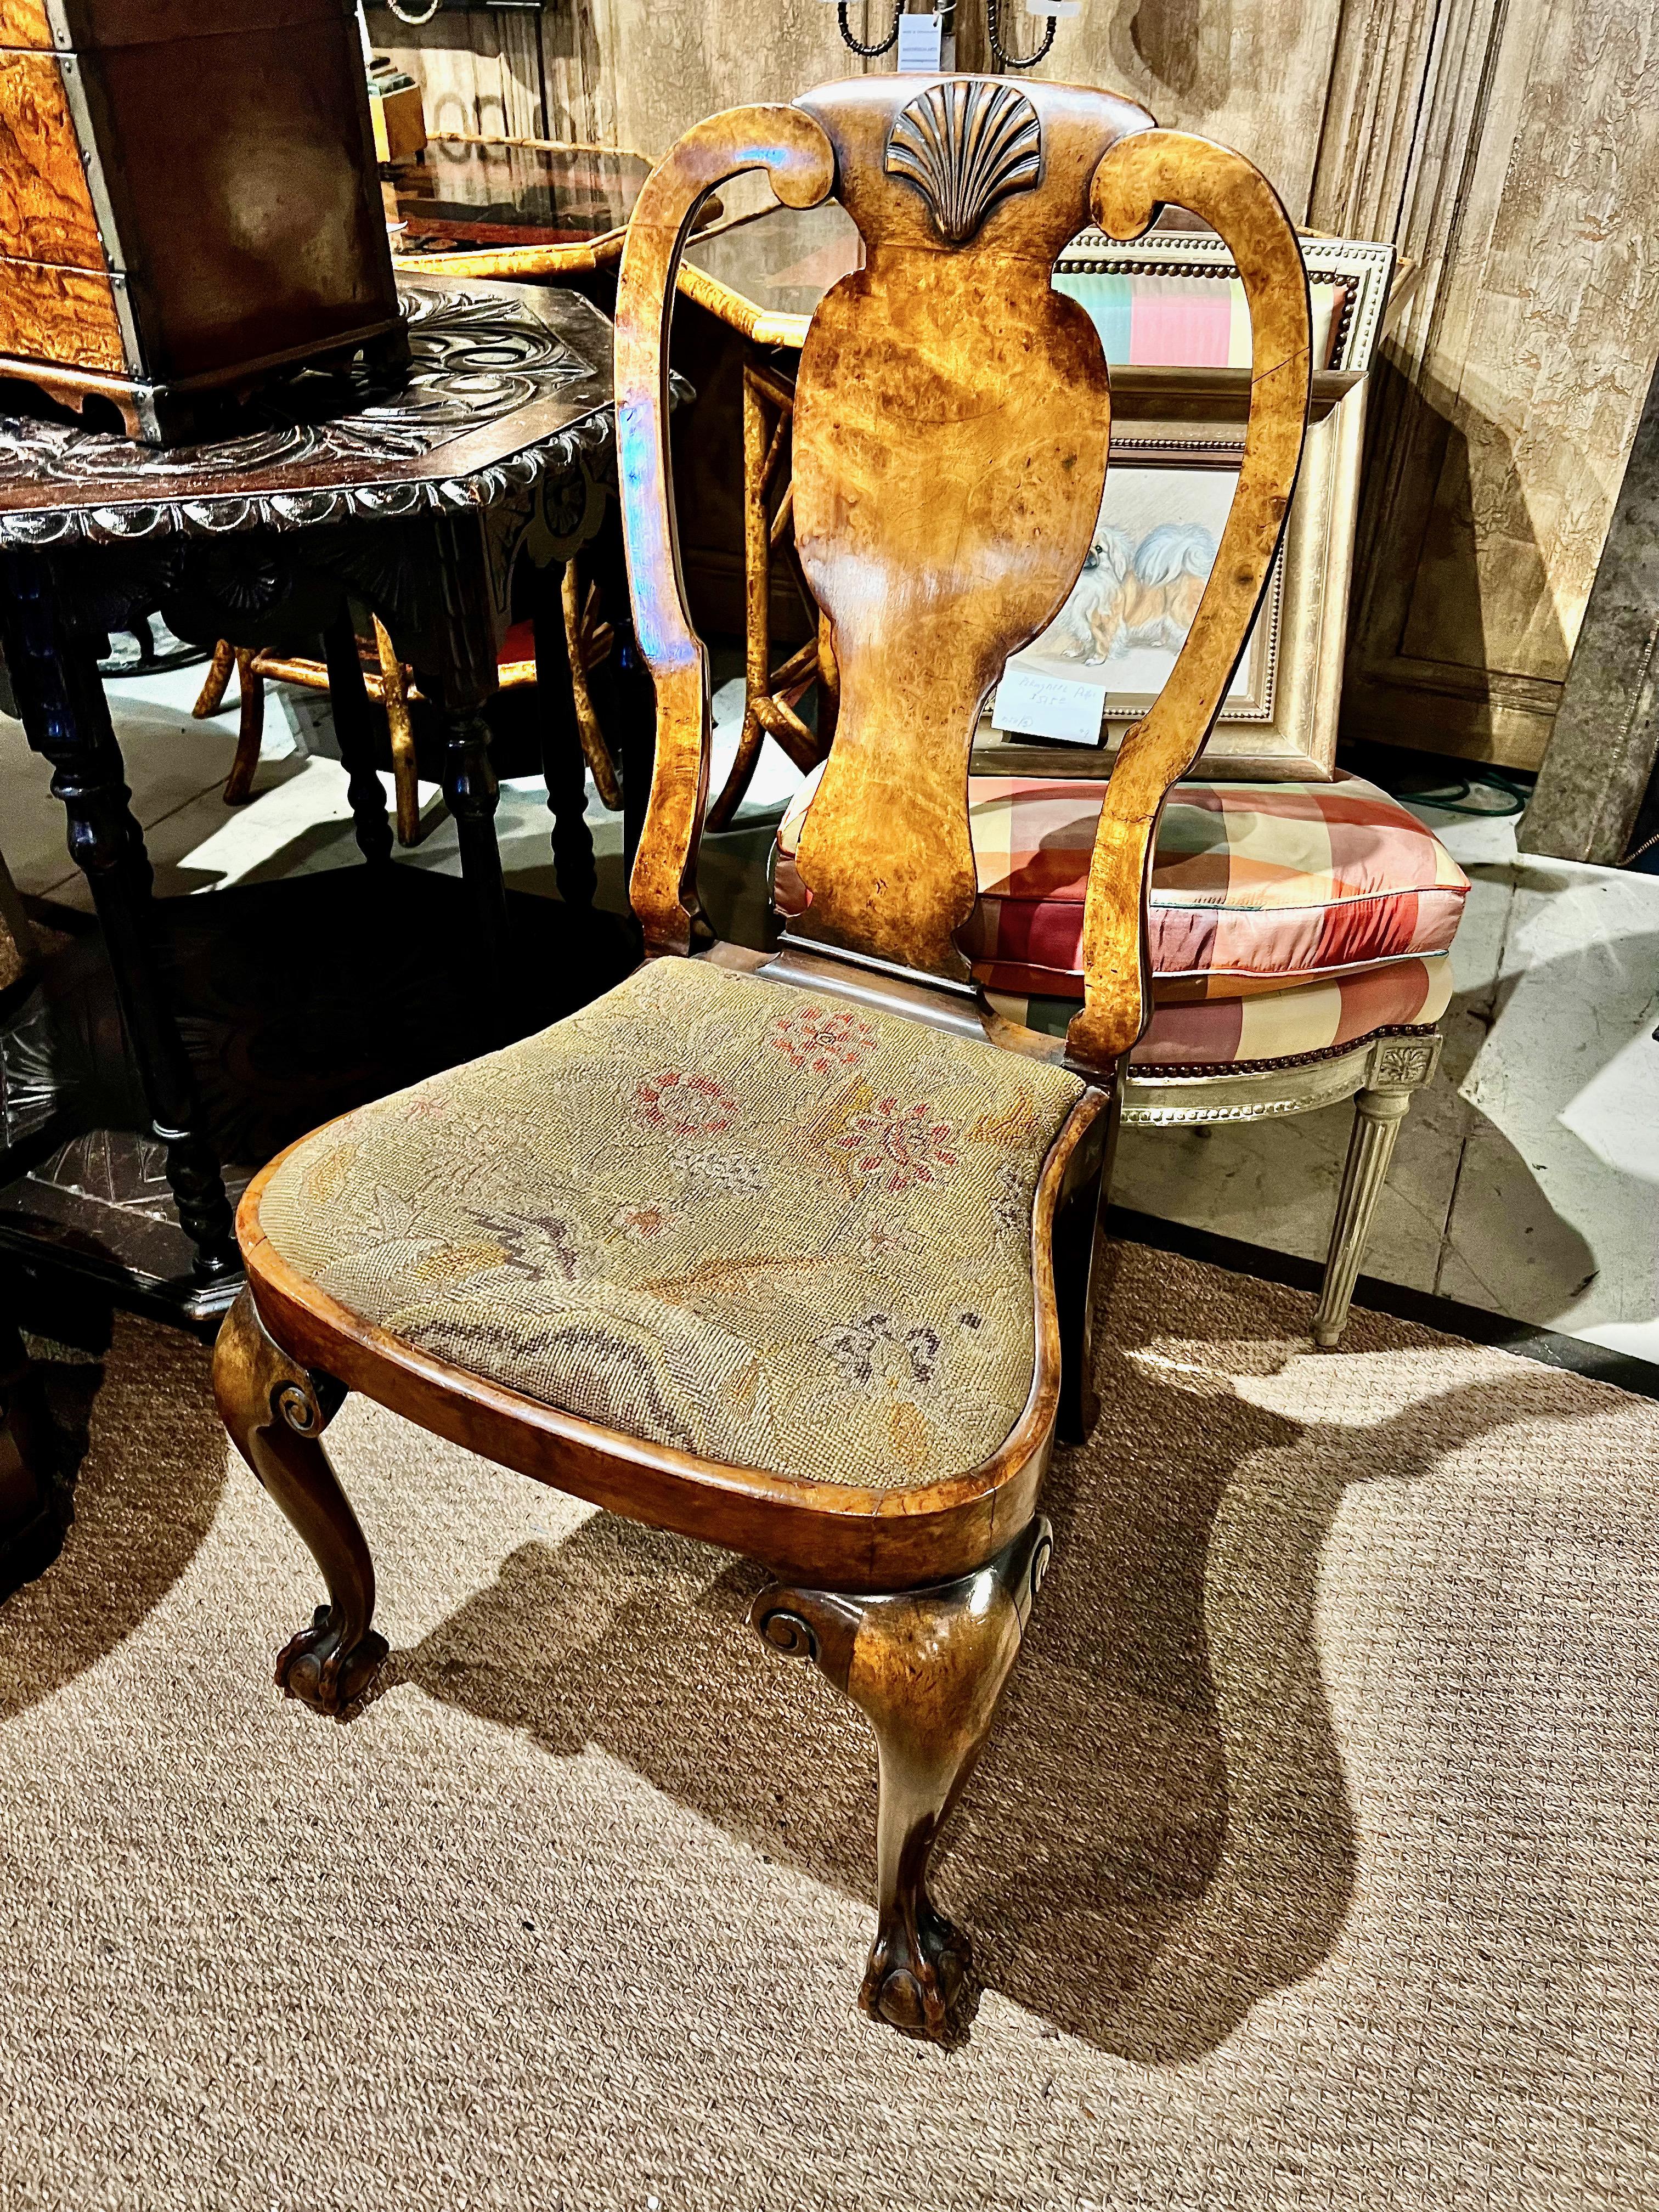 This is an extremely handsome Queen Anne Burl Walnut side chair. The chair features a finely carved shell to the crest rail, beautiful burl walnut veneer, carved knees and claw and ball feet. The compass seat has retained its 18th century needlework